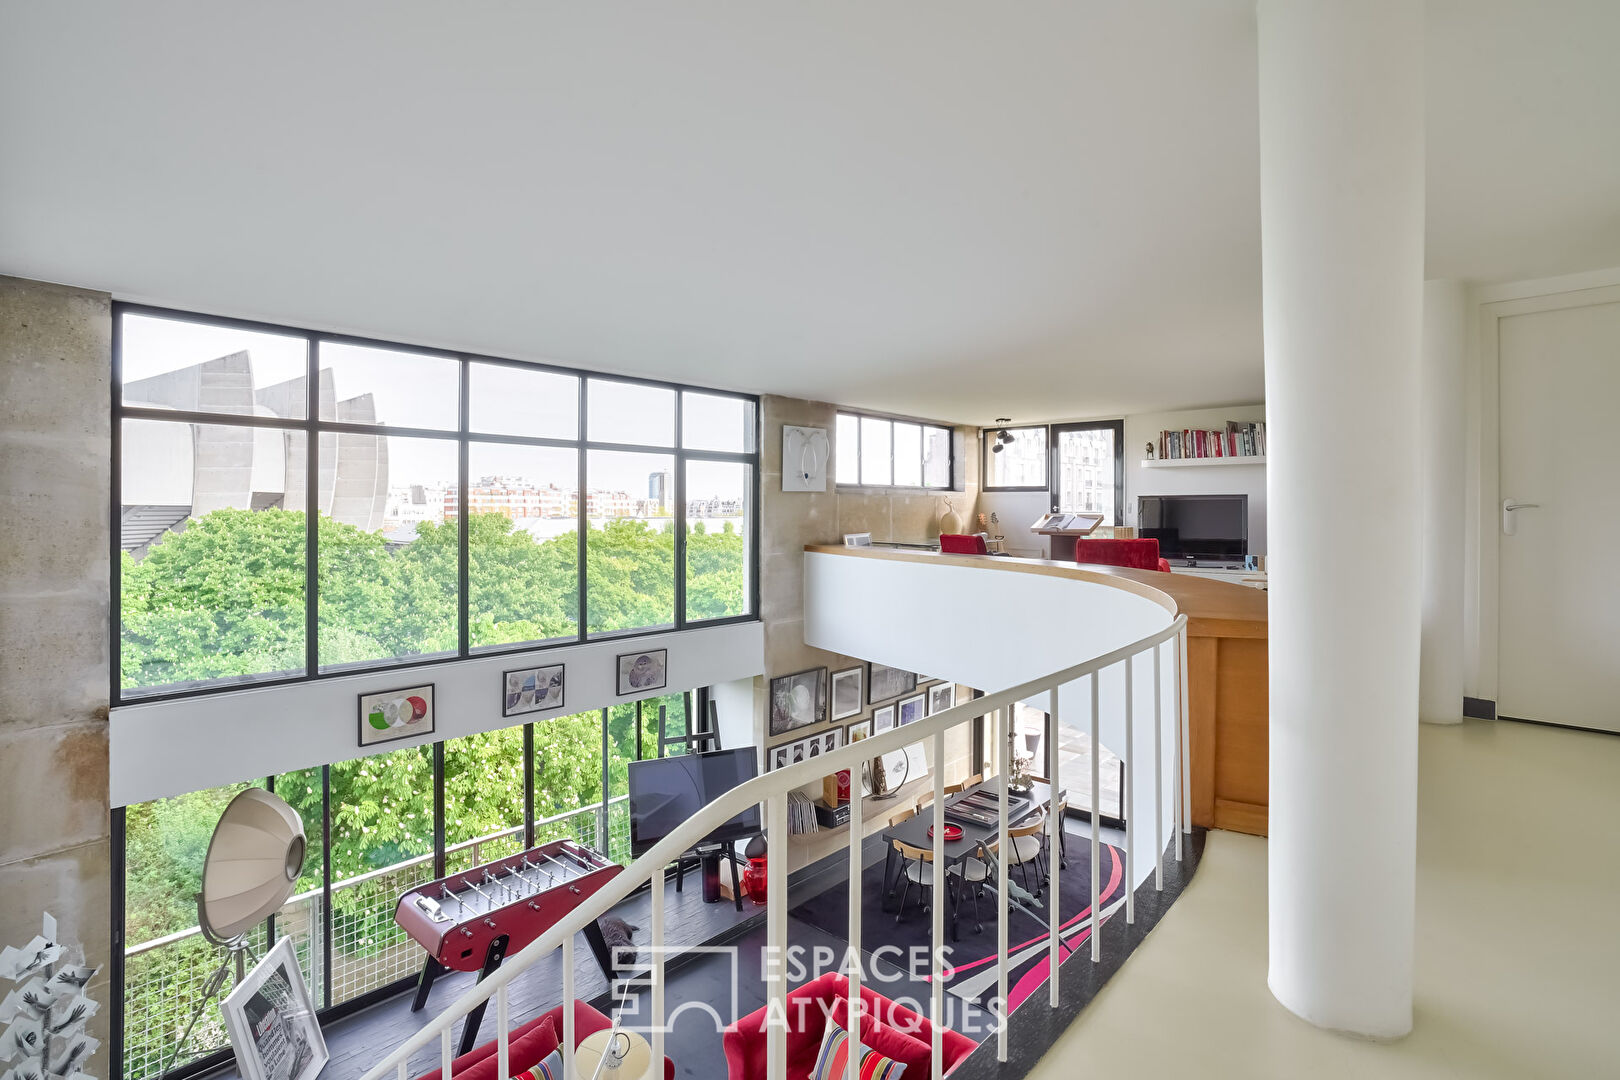 Duplex with terrace designed by architect Henri Pottier in the heart of the Princes district